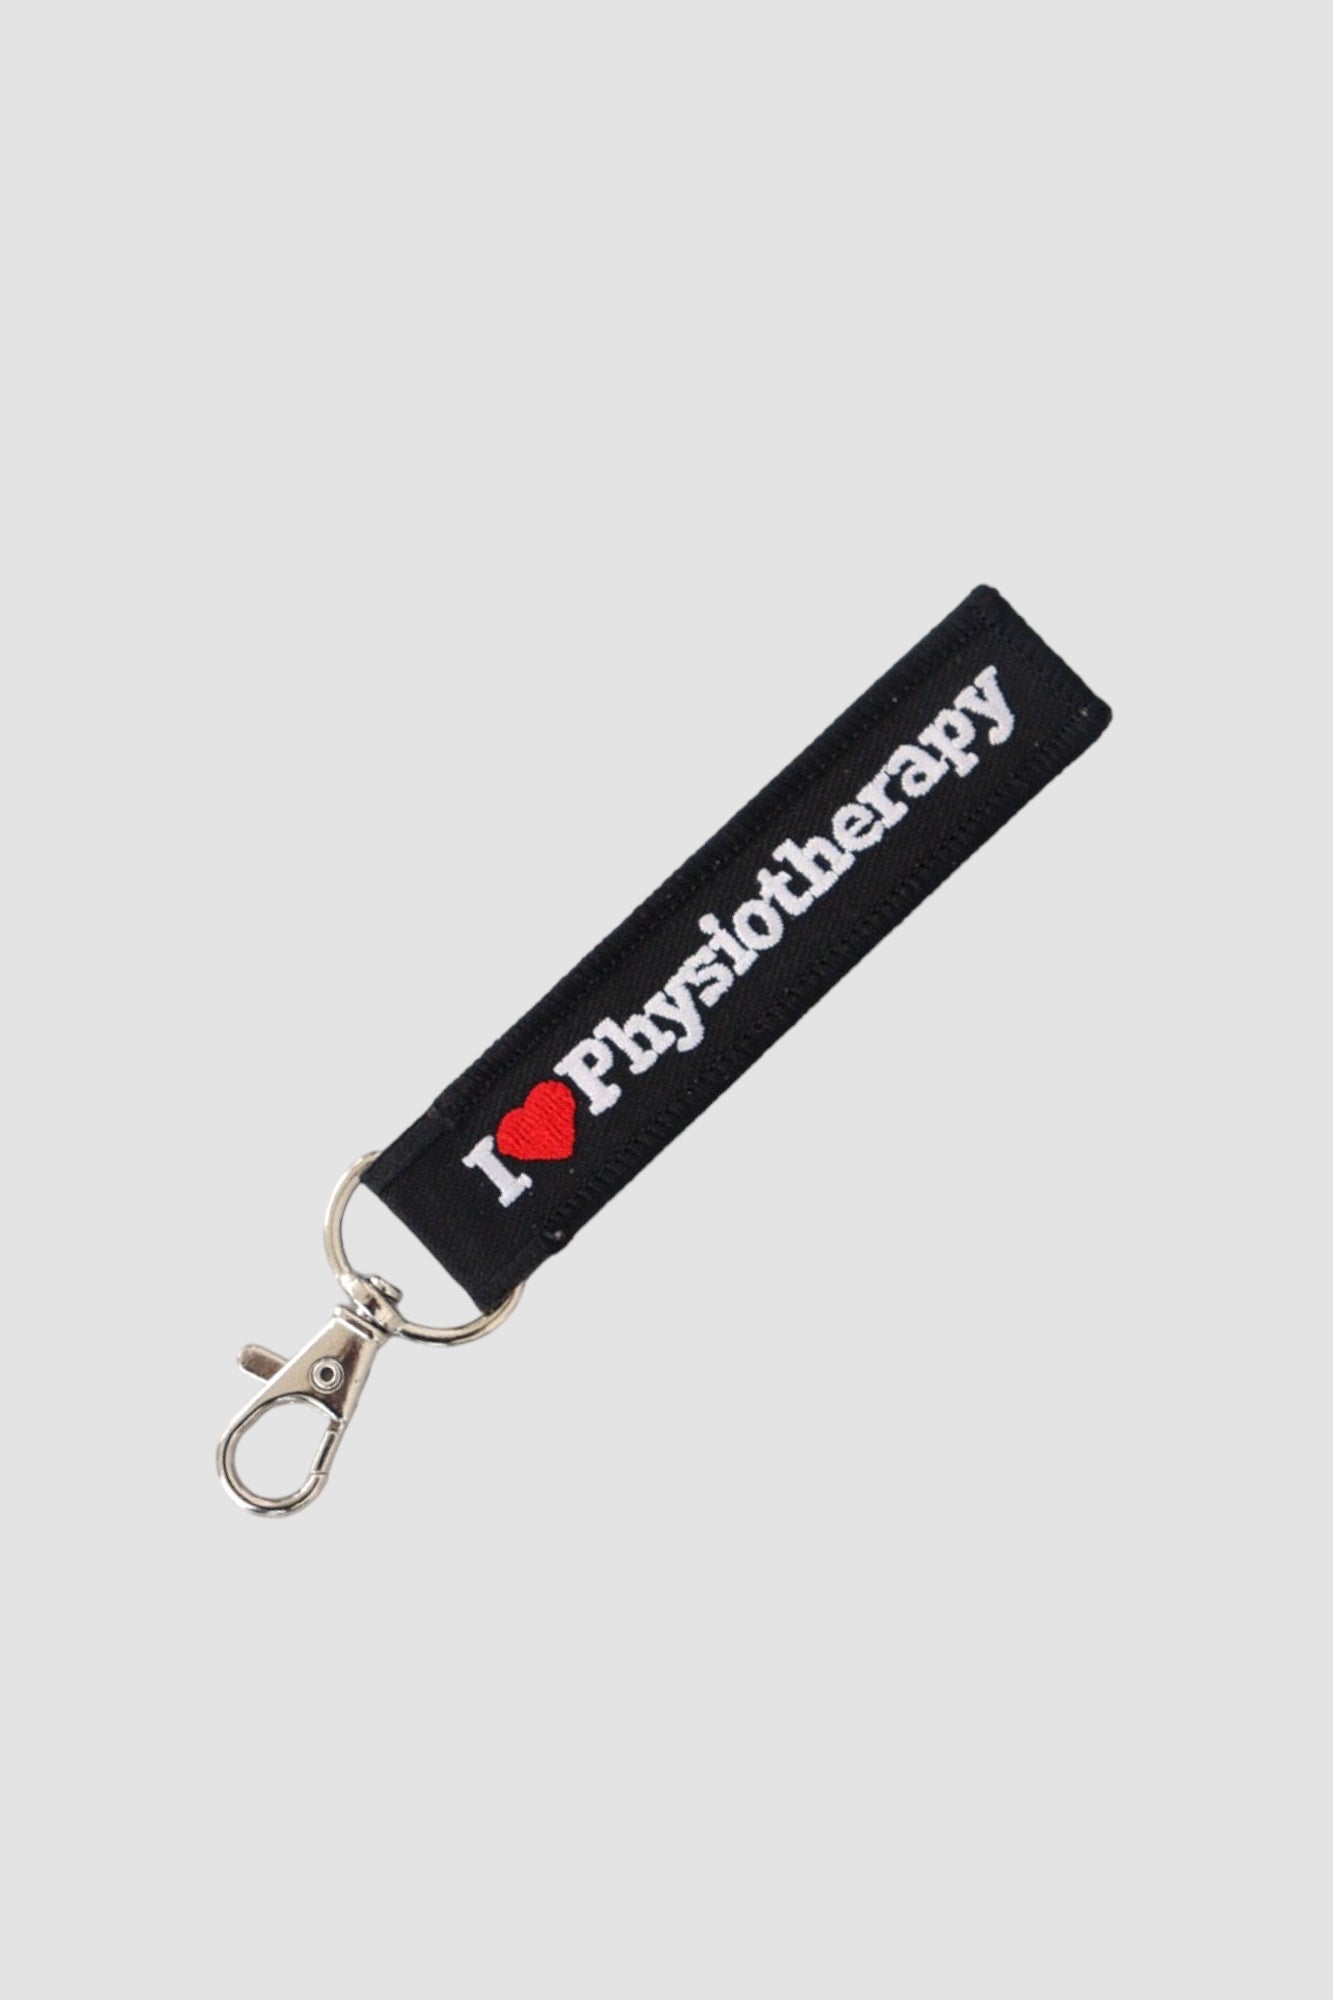 I Love Physiotherapy Key Chain